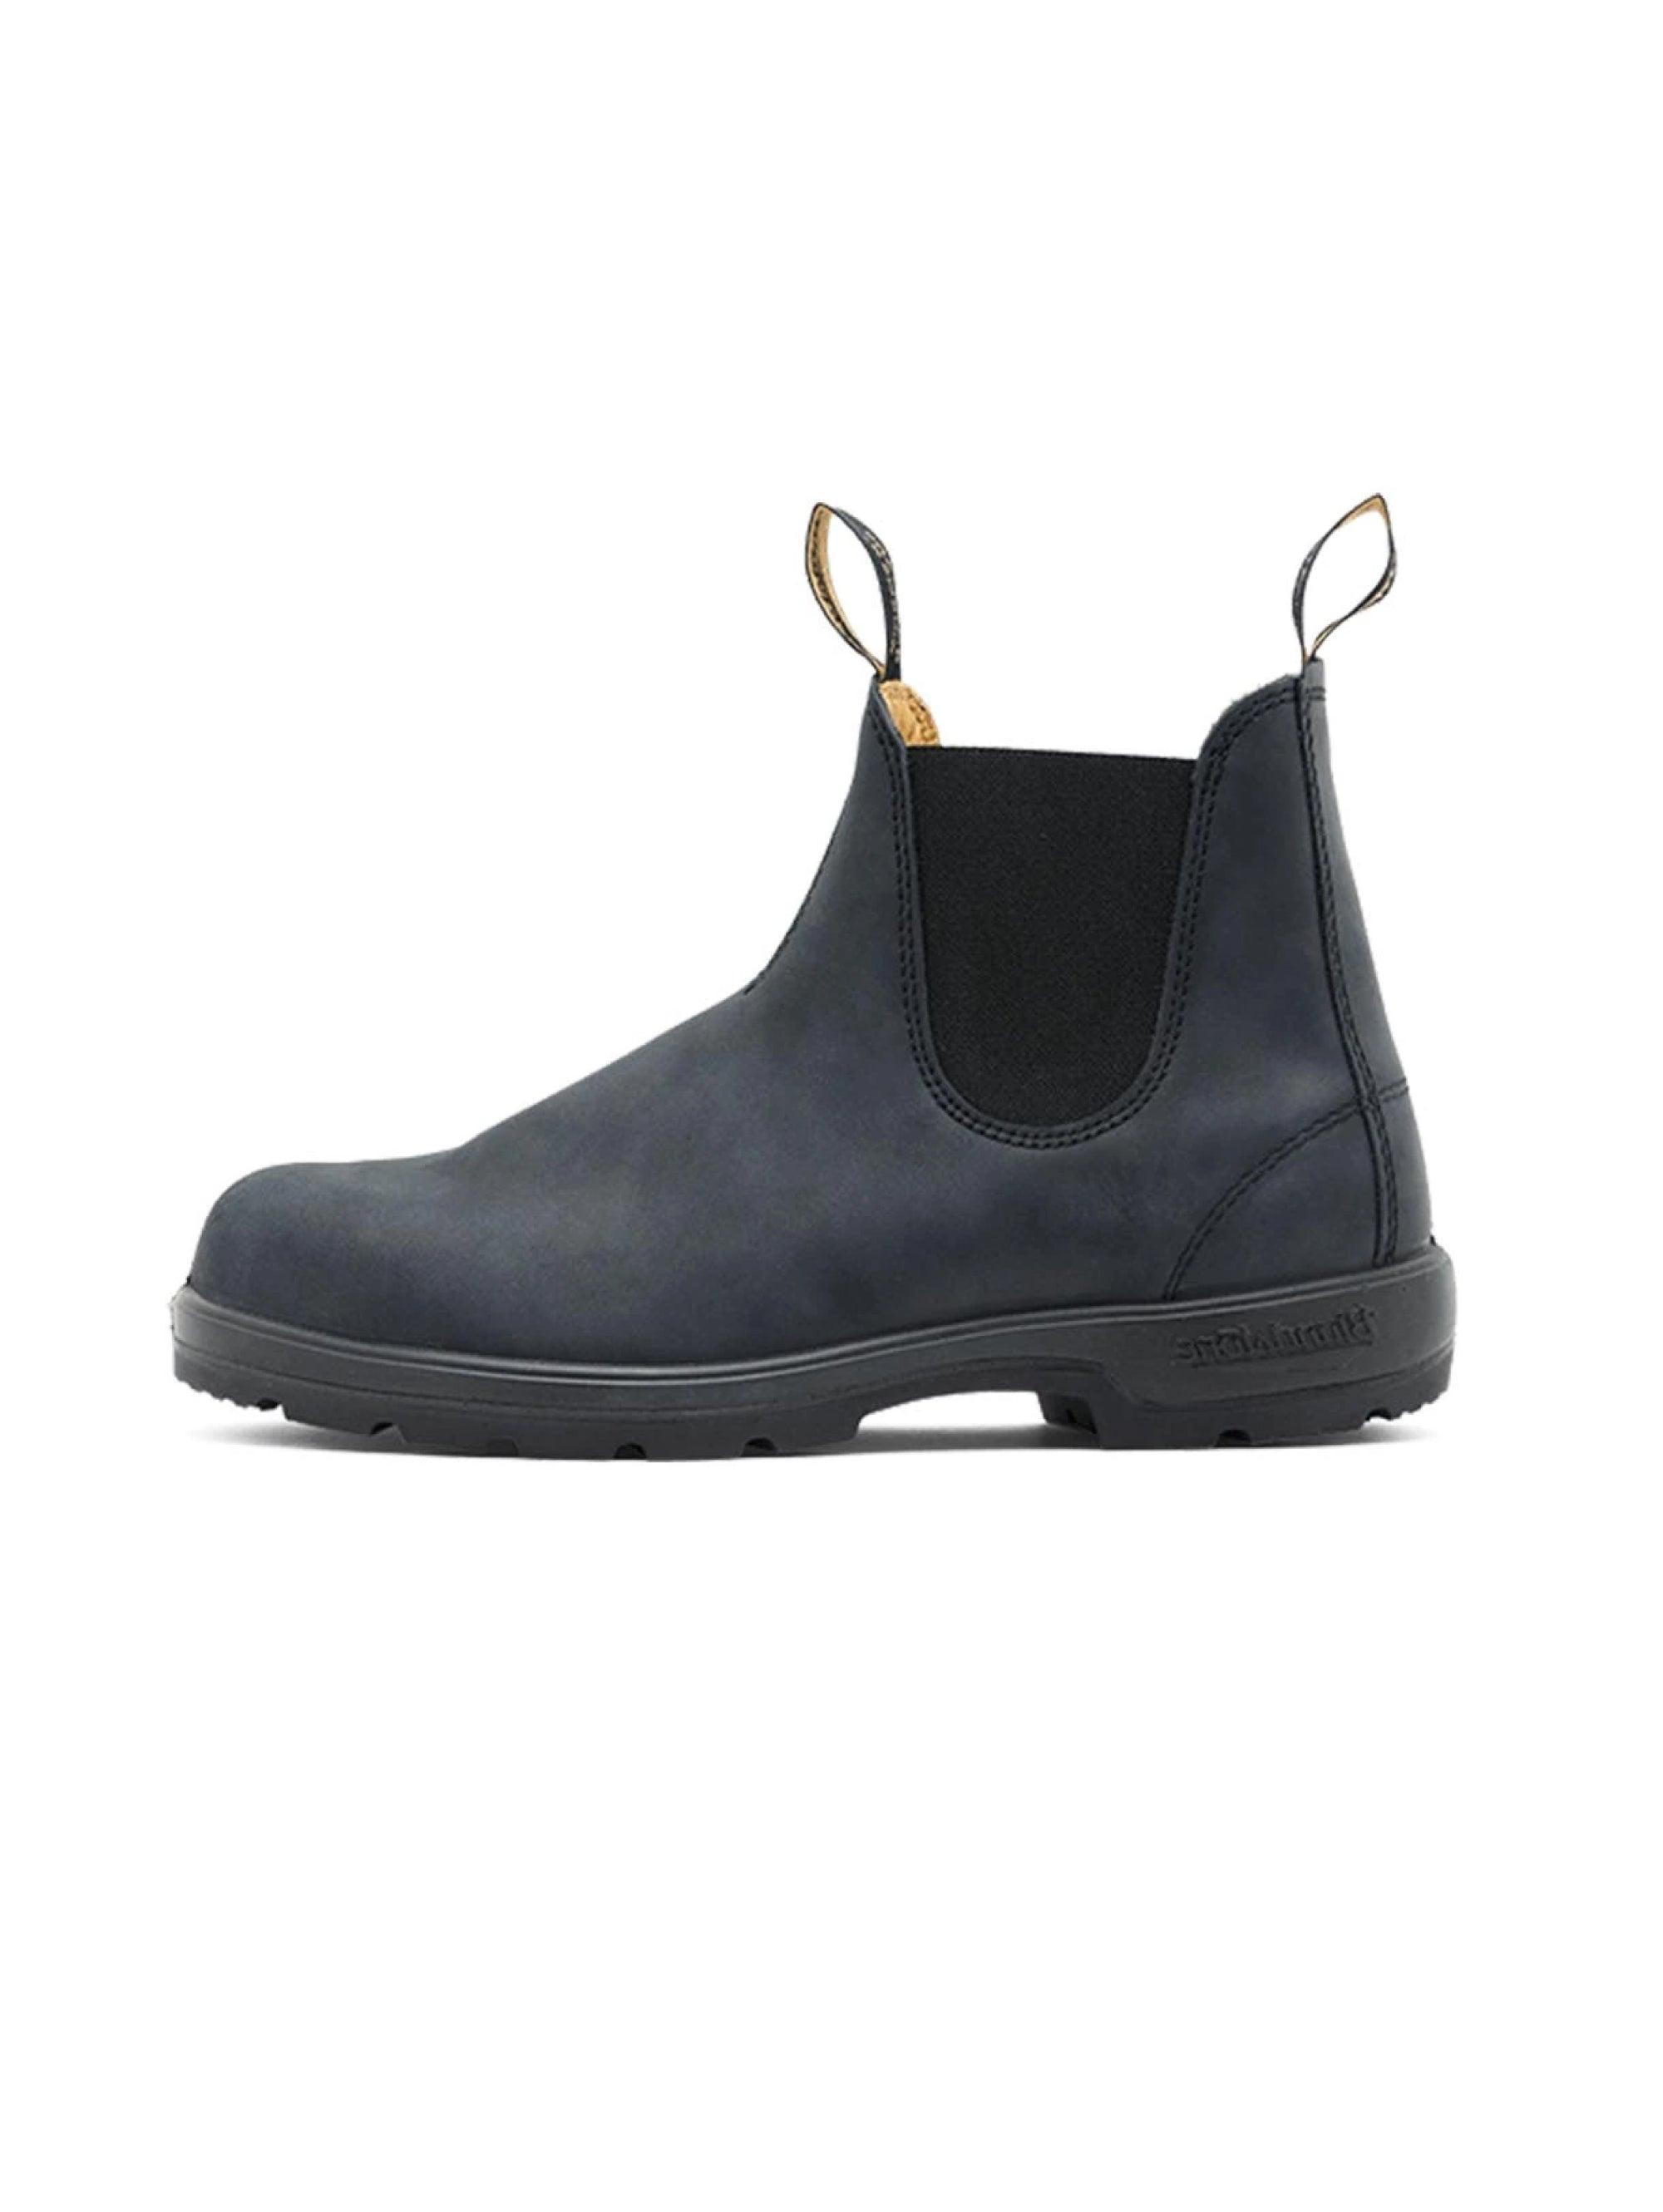 Blundstone Rustic Black Chelsea Boots | Lyst